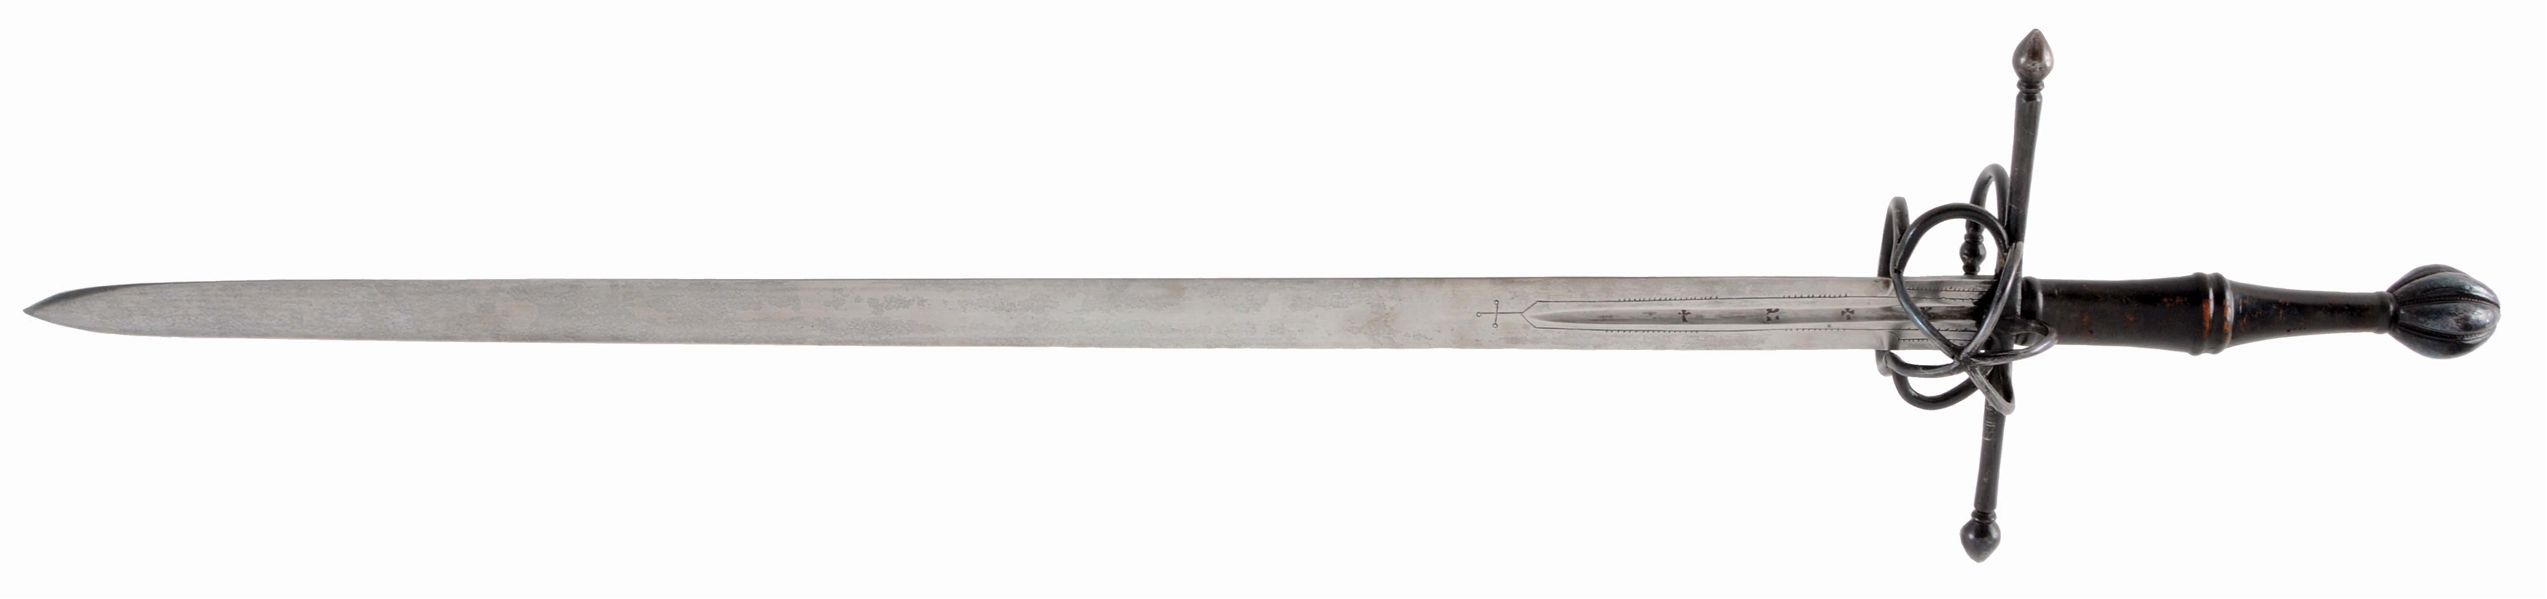 A SAXON HAND-AND-A-HALF SWORD, POSSIBLY FOURTH QUARTER OF THE 16TH CENTURY, OF A TYPE FOUND IN THE SAXON ELECTOR GUARD ARMORY AT DRESDEN.